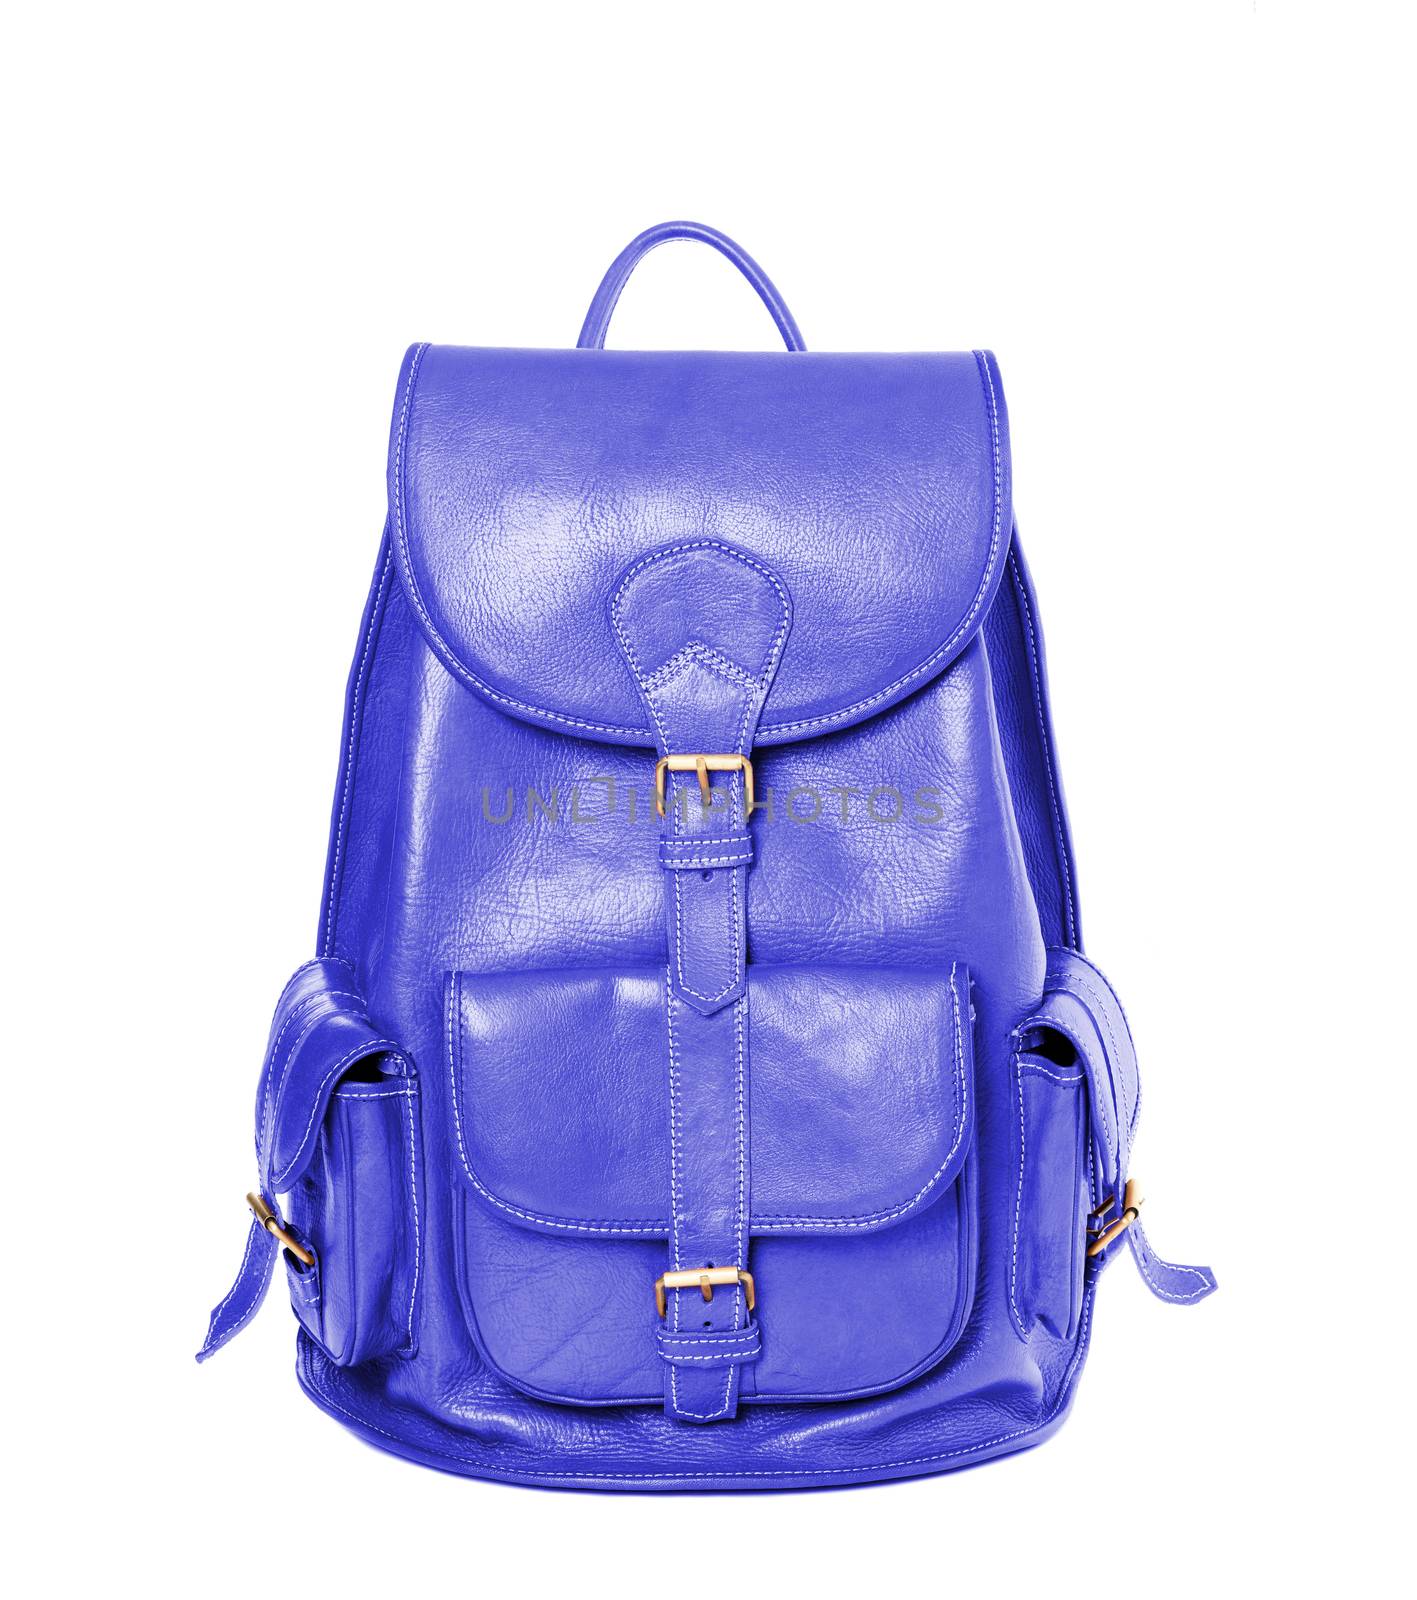 slate blue leather backpack standing isolated on white background